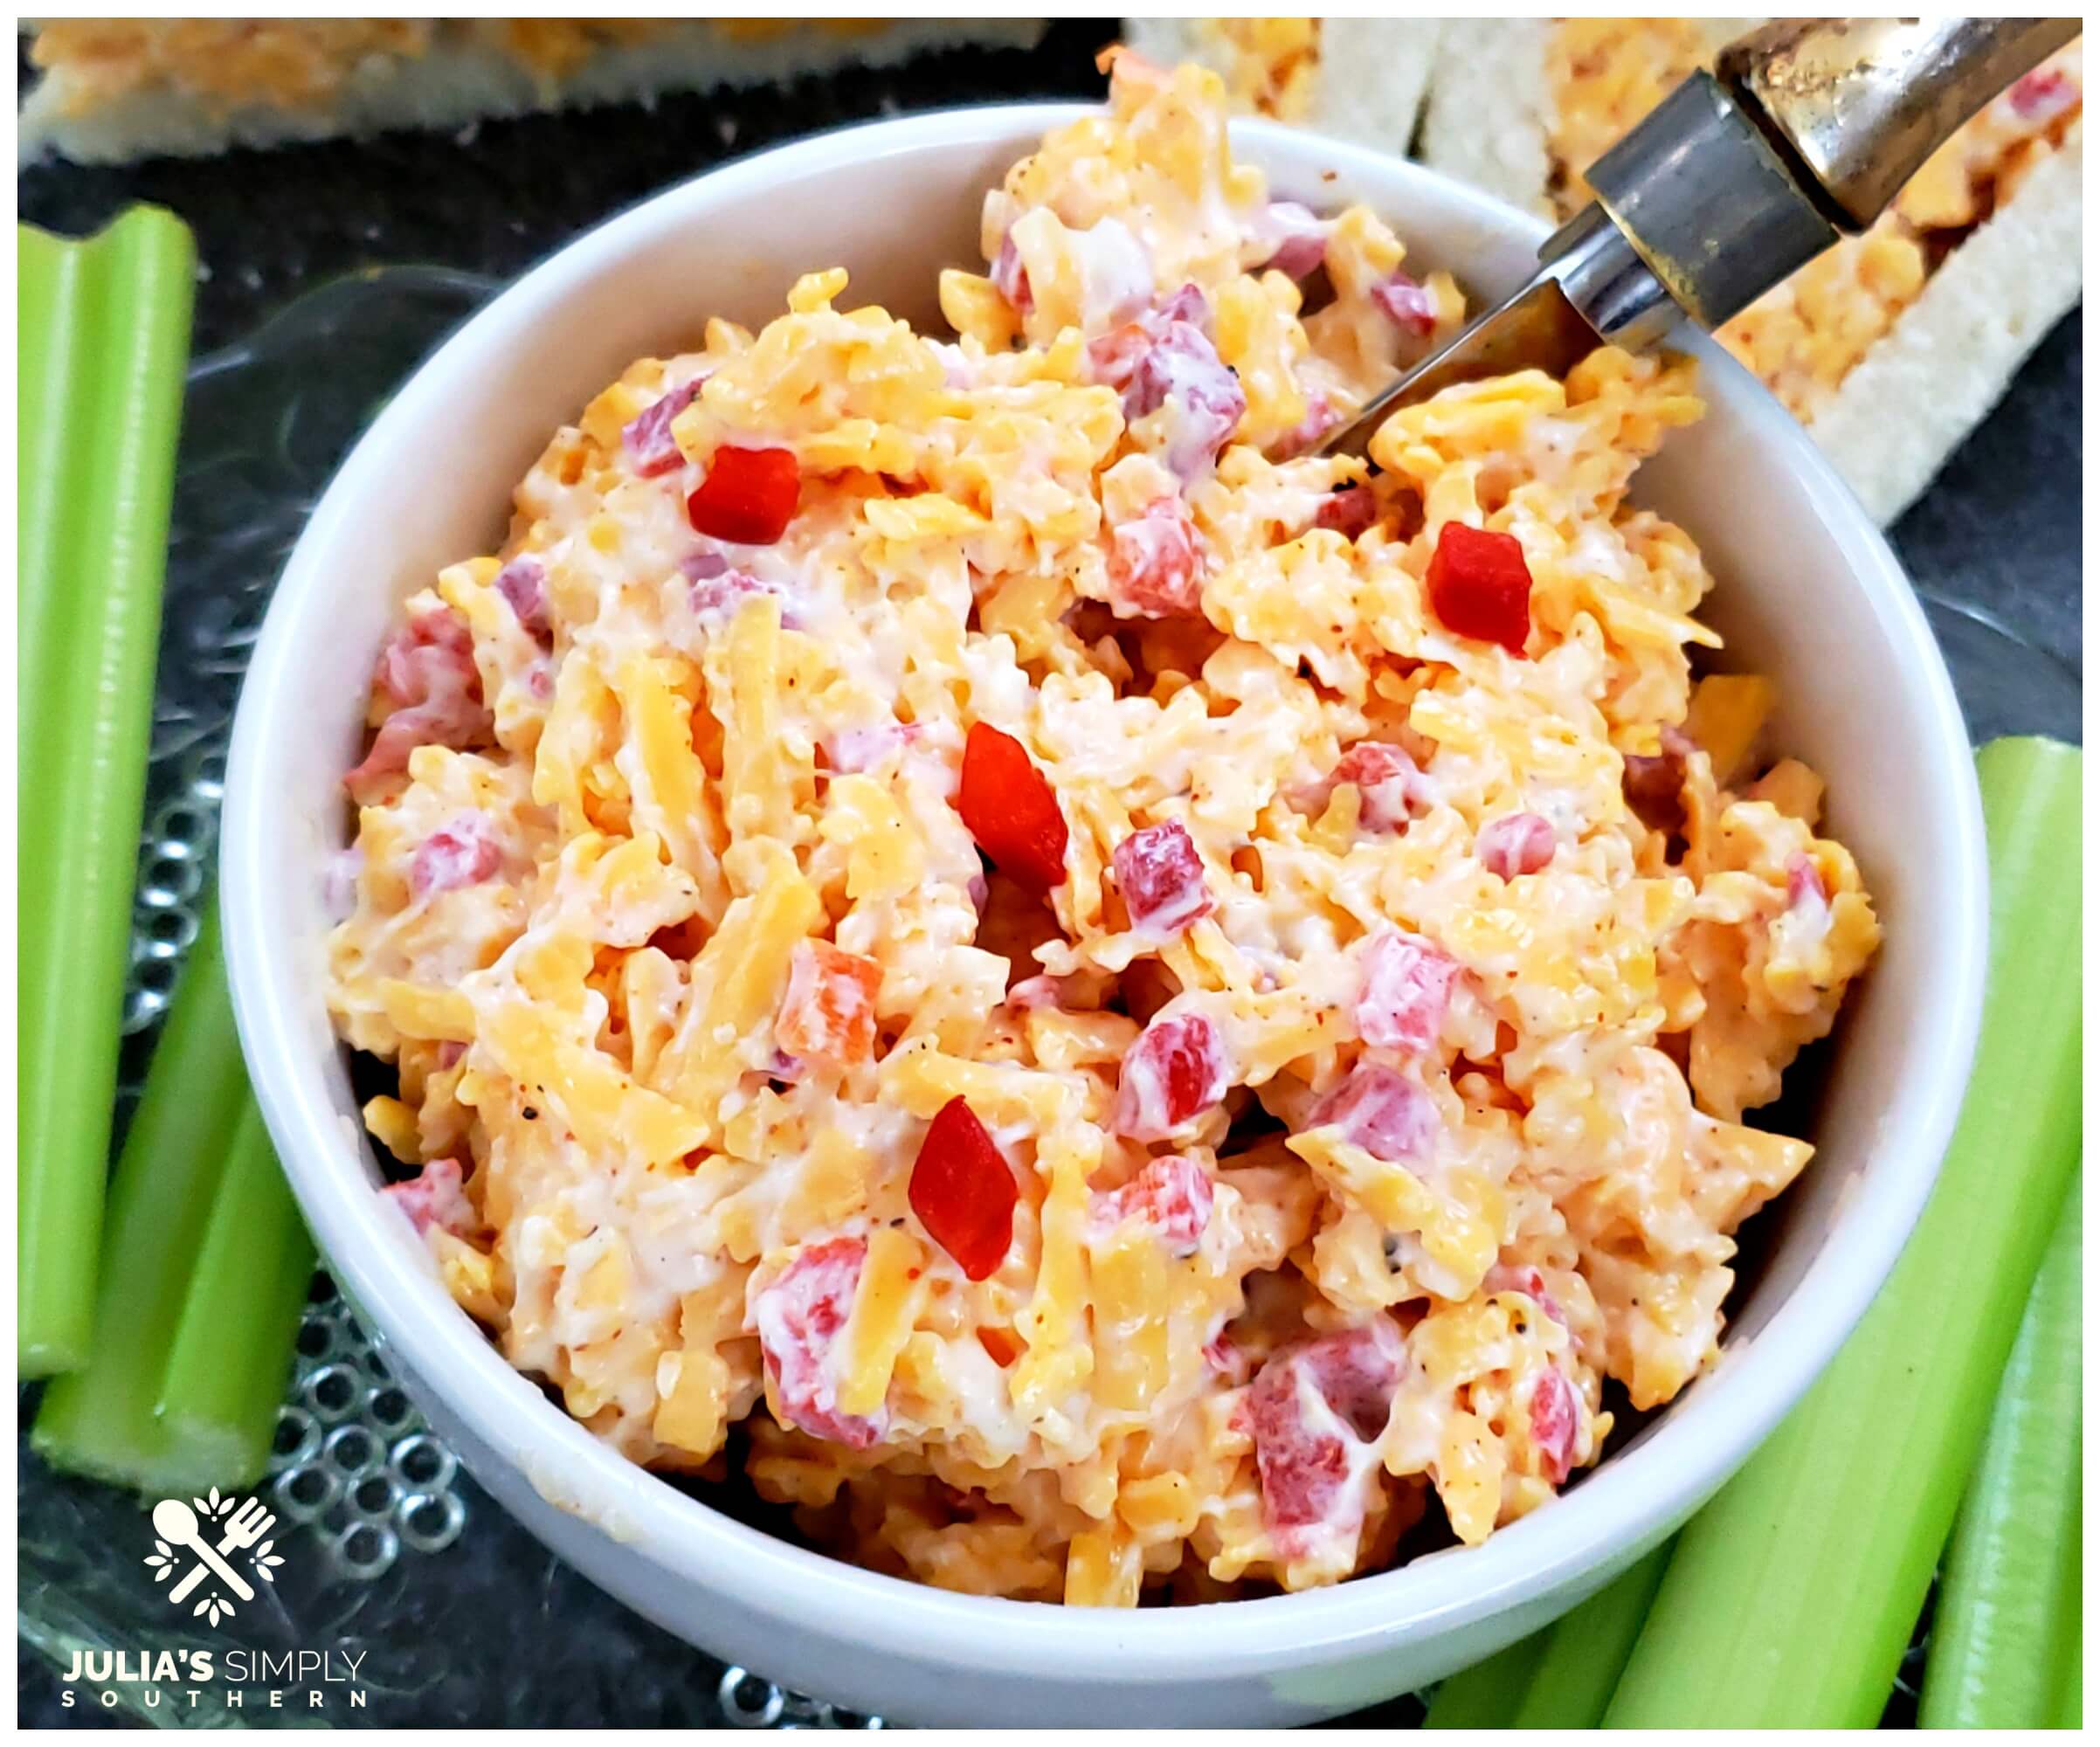 Spicy Pimento Cheese Famous Recipe Basic Easy Awesome Julias Simply Southern Homemade Woman Blogger Recipes 